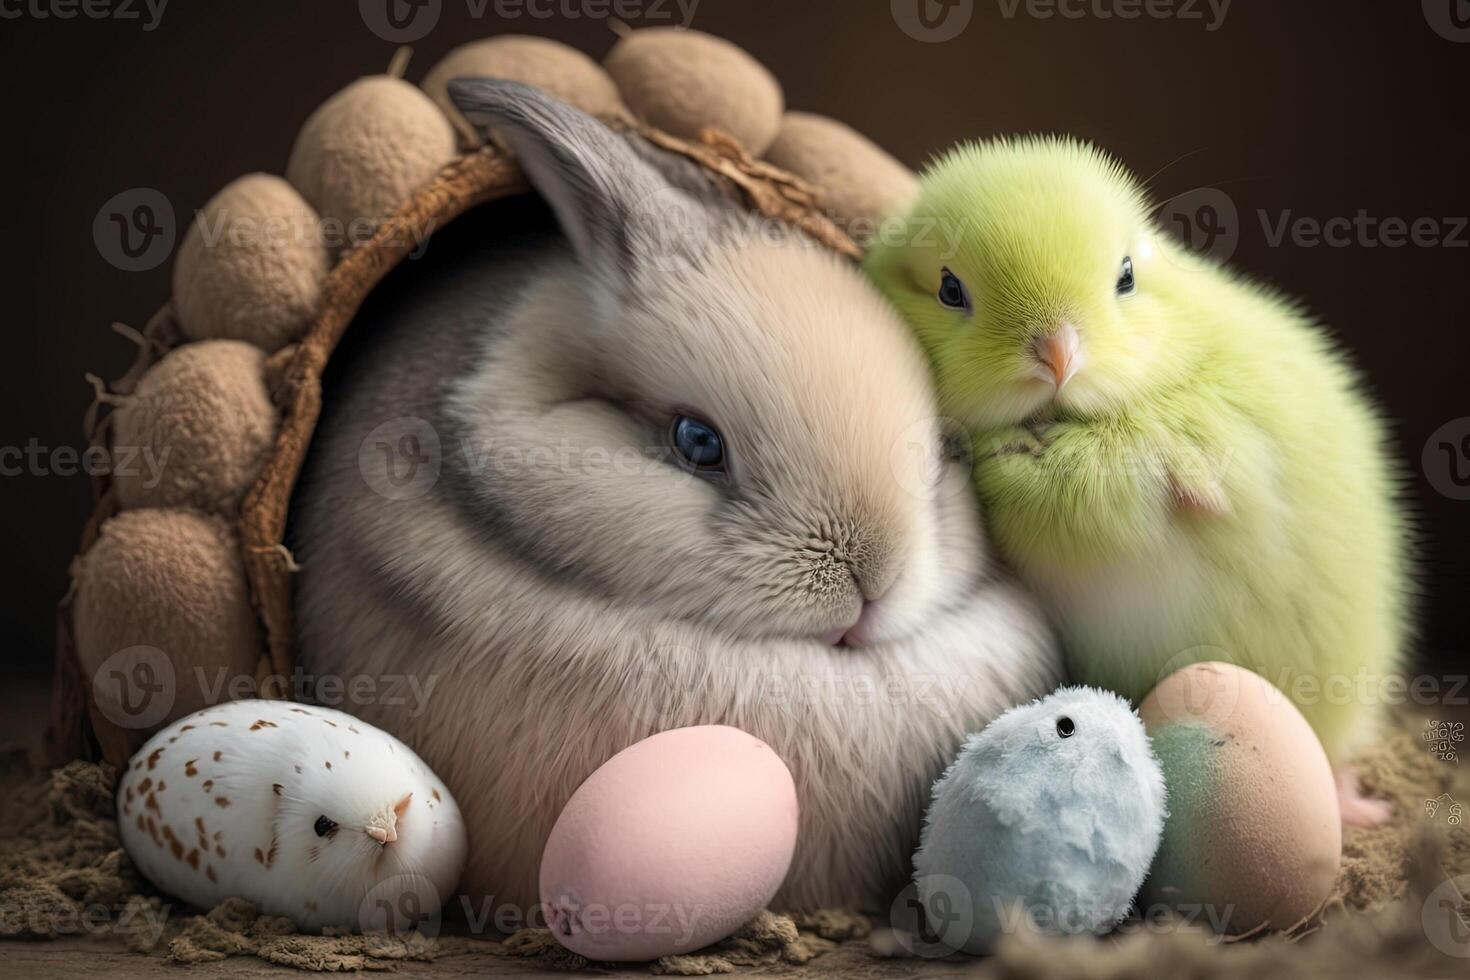 Cute bunny and chick cuddled up together, surrounded by pastel - colored Easter eggs Easter illustration photo